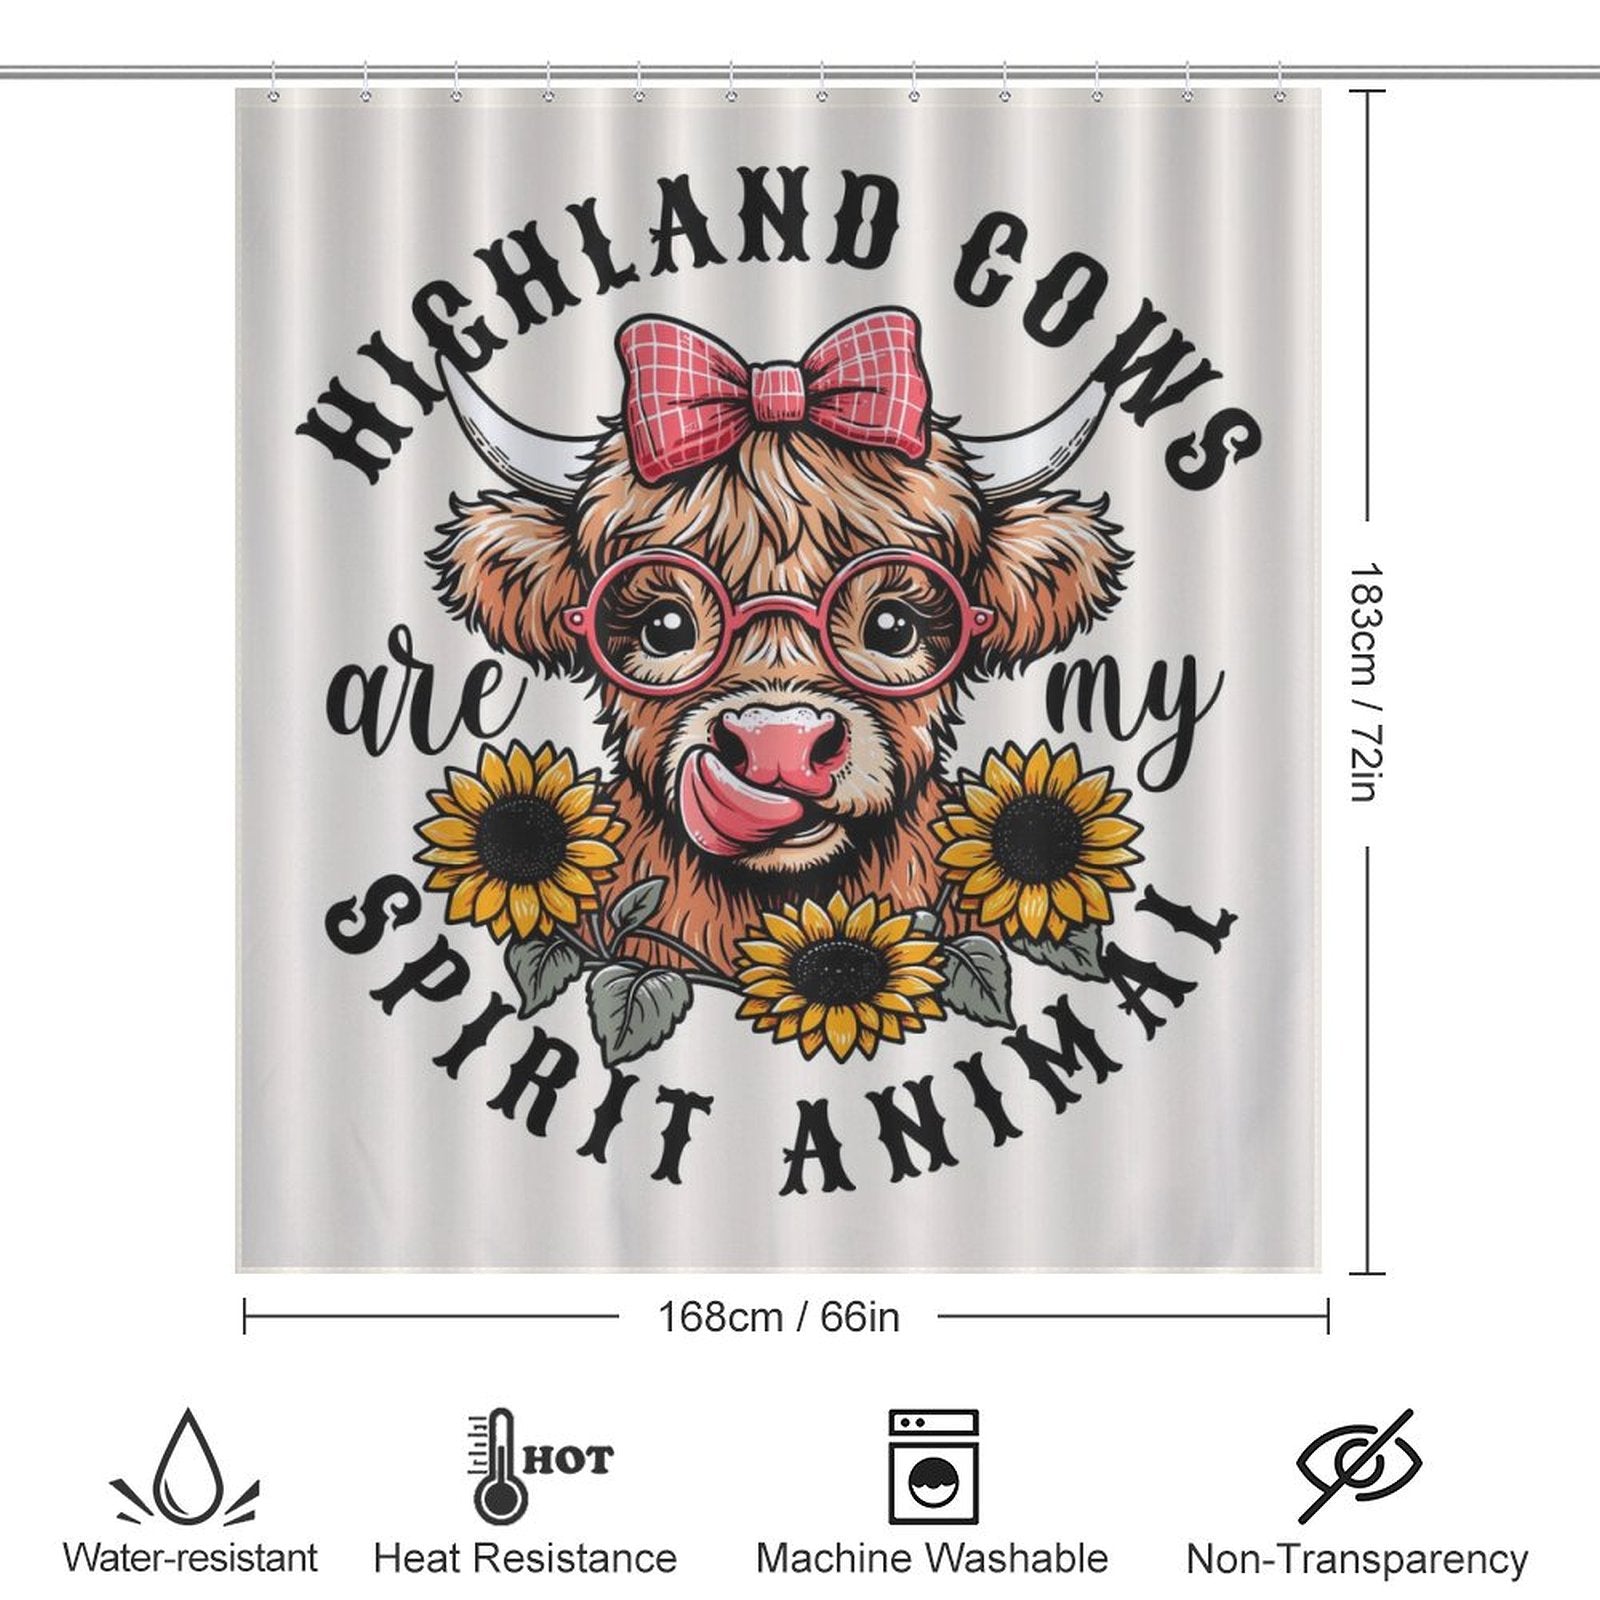 A whimsical shower curtain featuring a cartoon highland cow wearing glasses and a bow, surrounded by sunflowers, with the text "Highland cows are my spirit animal." Perfect for nature-inspired bathroom decor, product dimensions and features are shown below. Product Name: Cute Sunflower Glasses Highland Cow Shower Curtain-Cottoncat. Brand Name: Cotton Cat.